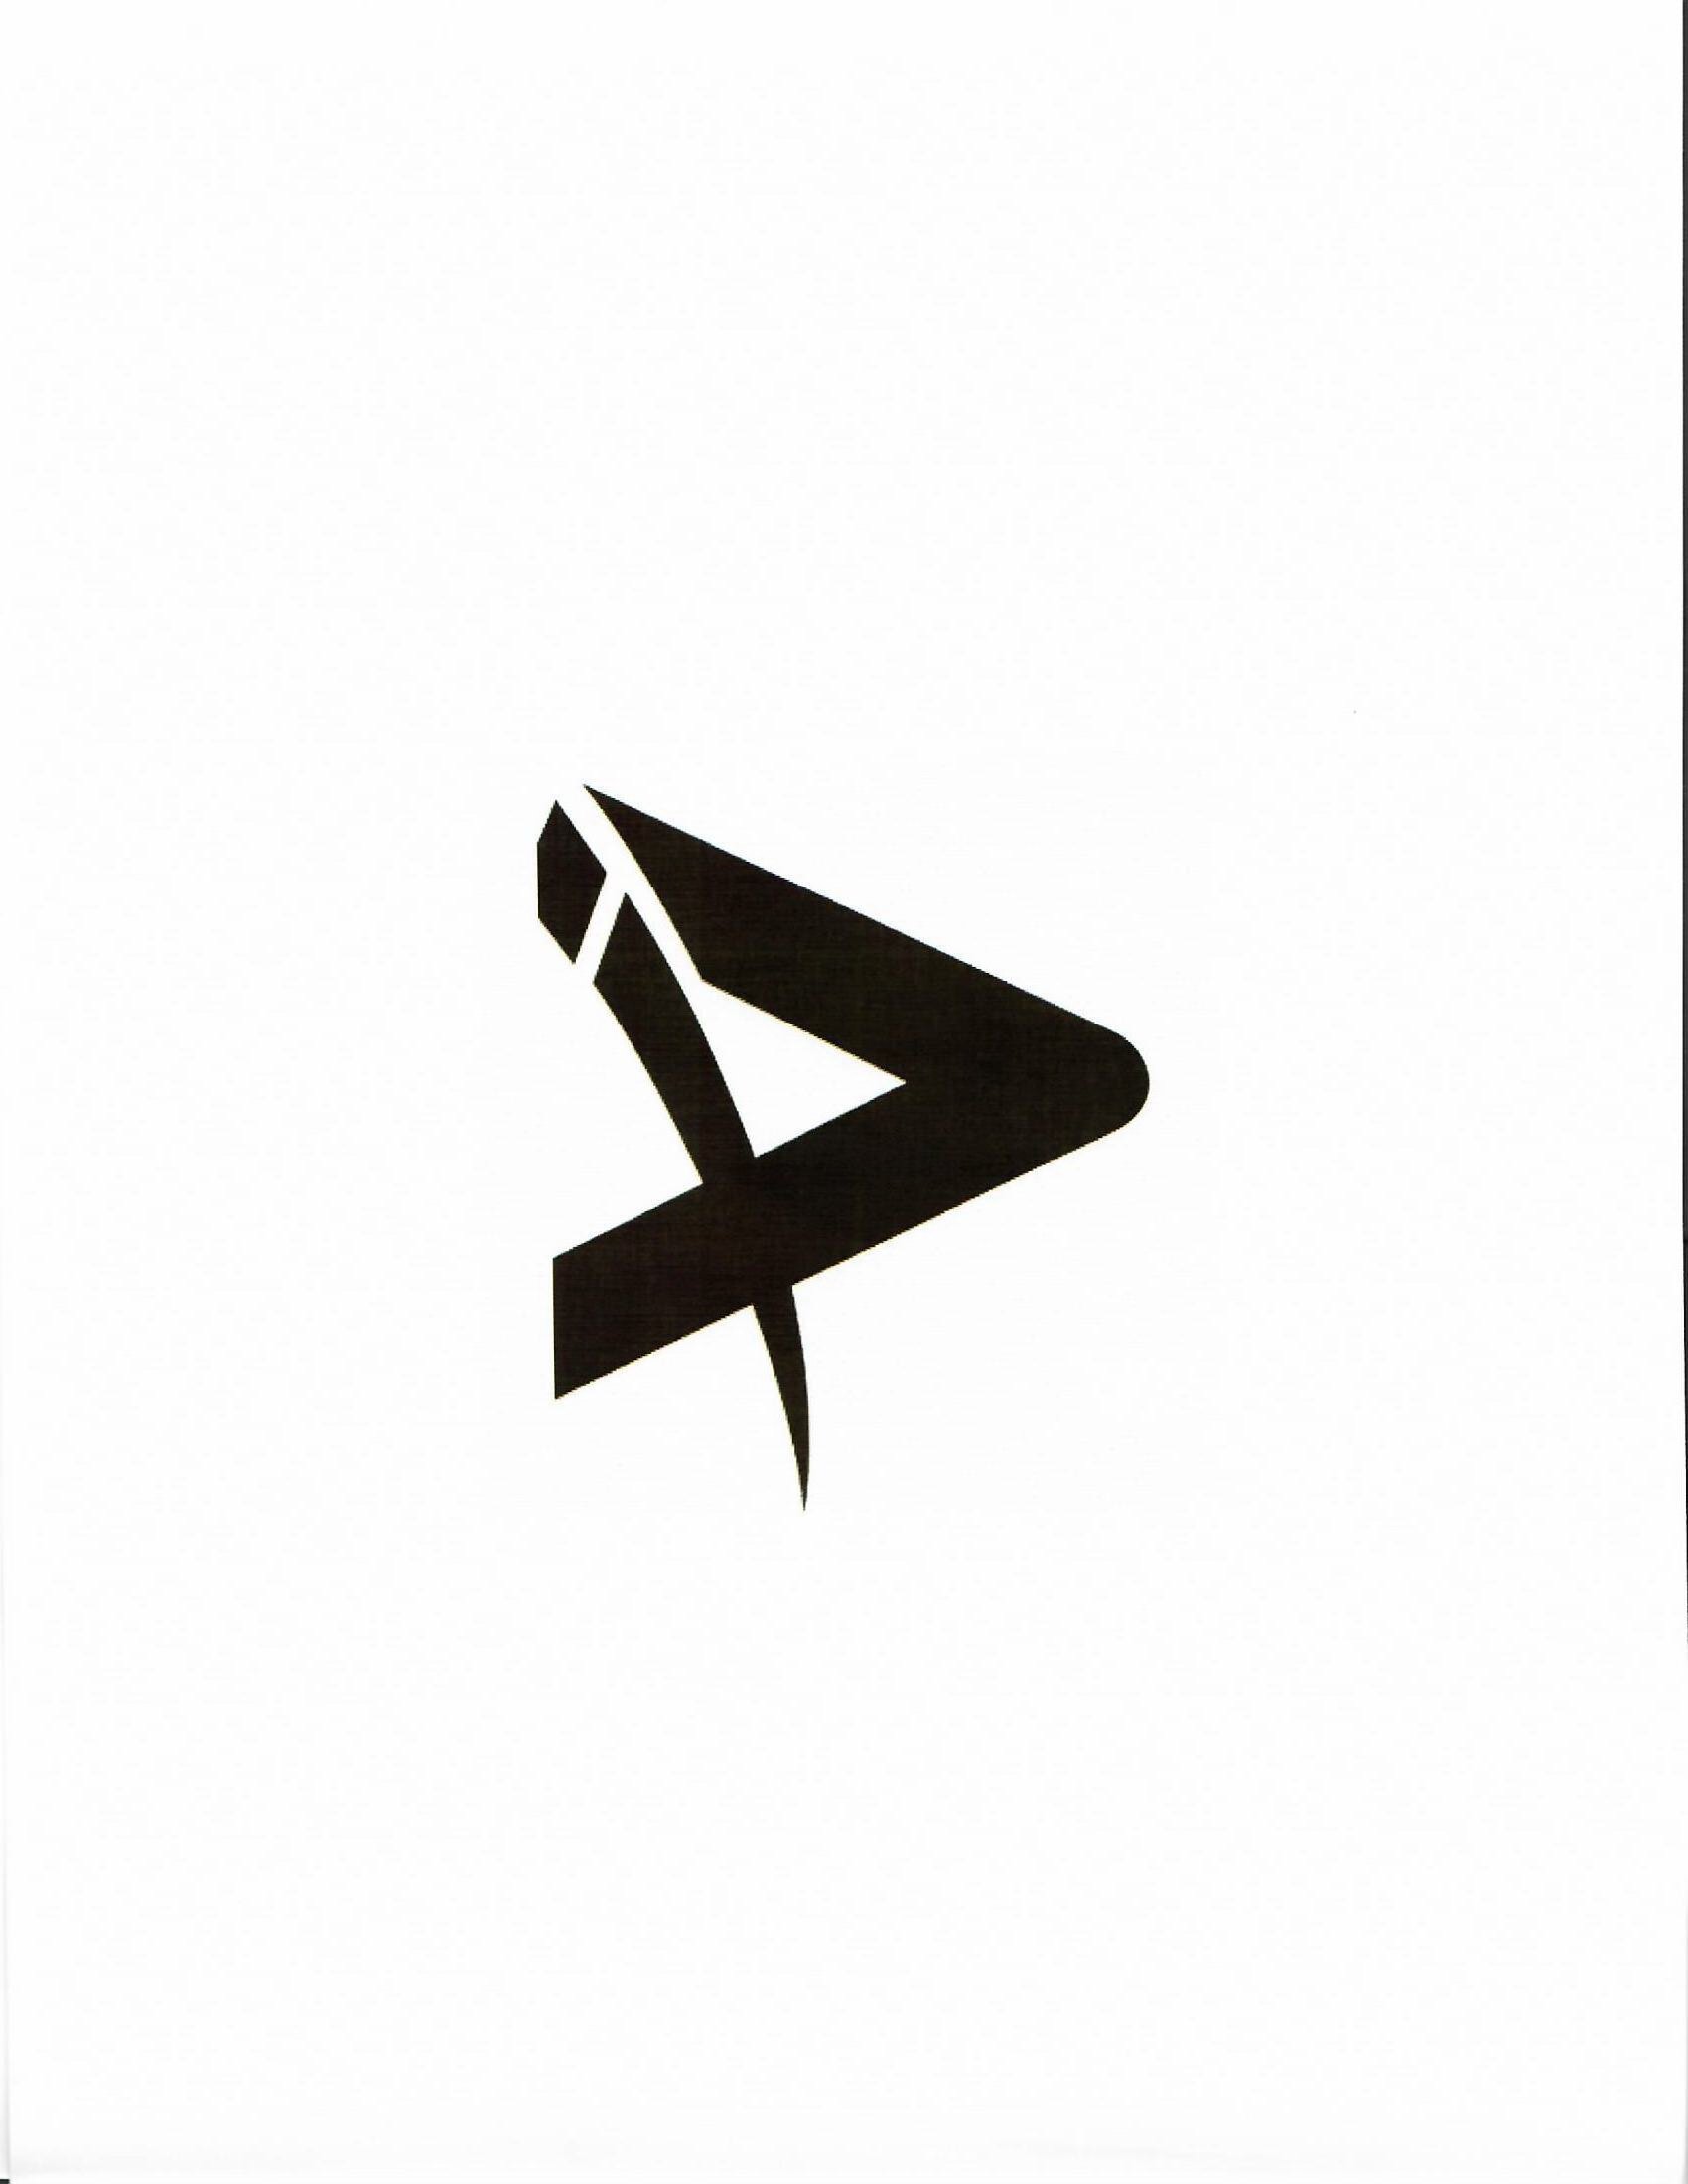 Trademark Logo THE LETTER A ROTATED 90 DEGREES CLOCKWISE TO LOOK LIKE THE GREATER THAN SYMBOL (I.E., ))